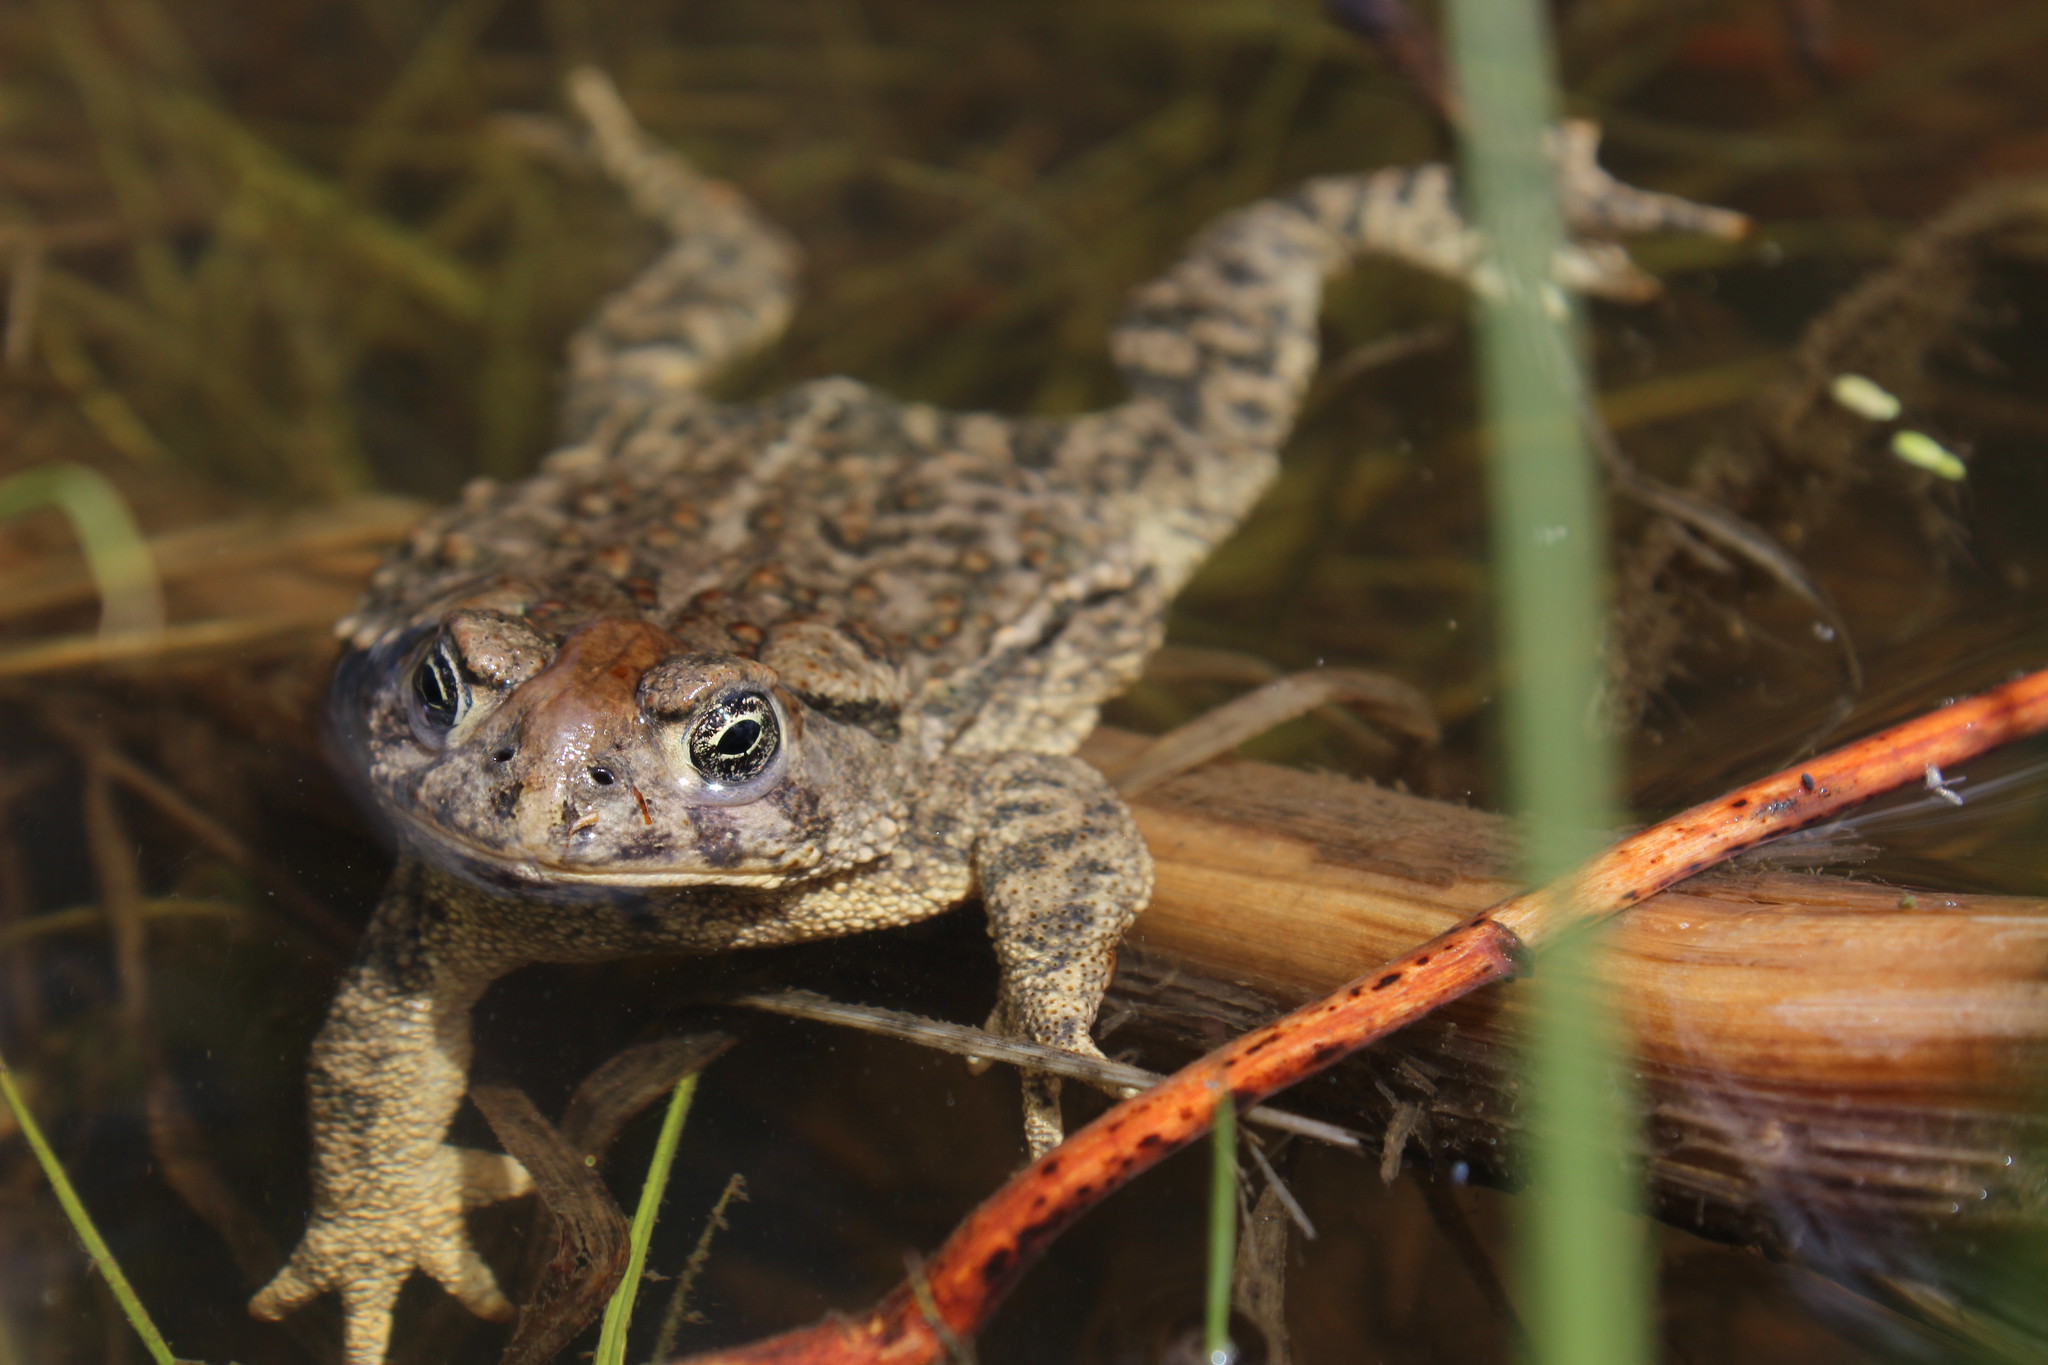 Wyoming toad poses in the water for a portrait.